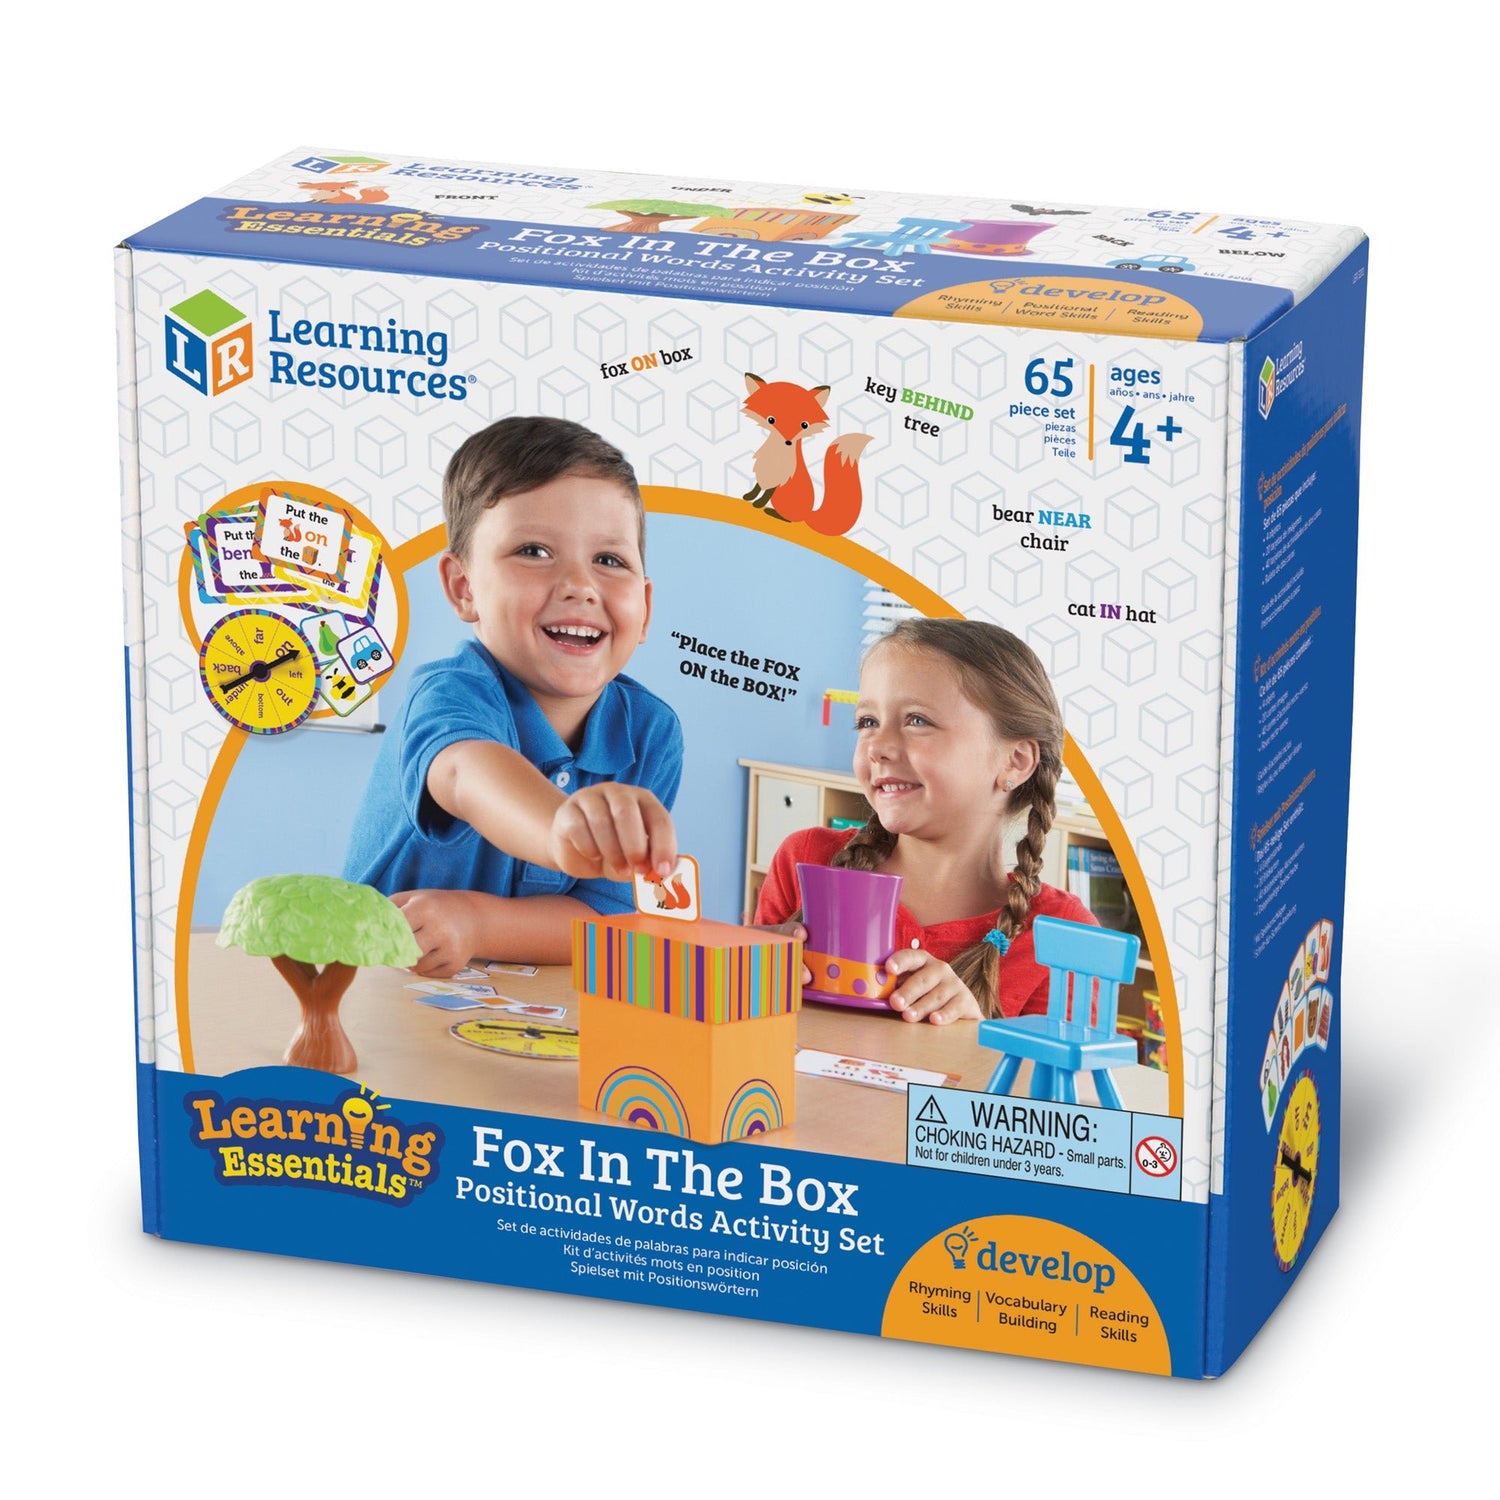 FOX IN A BOX - POSITIONAL WORD ACTIVITY SET by LEARNING RESOURCES - The Playful Collective